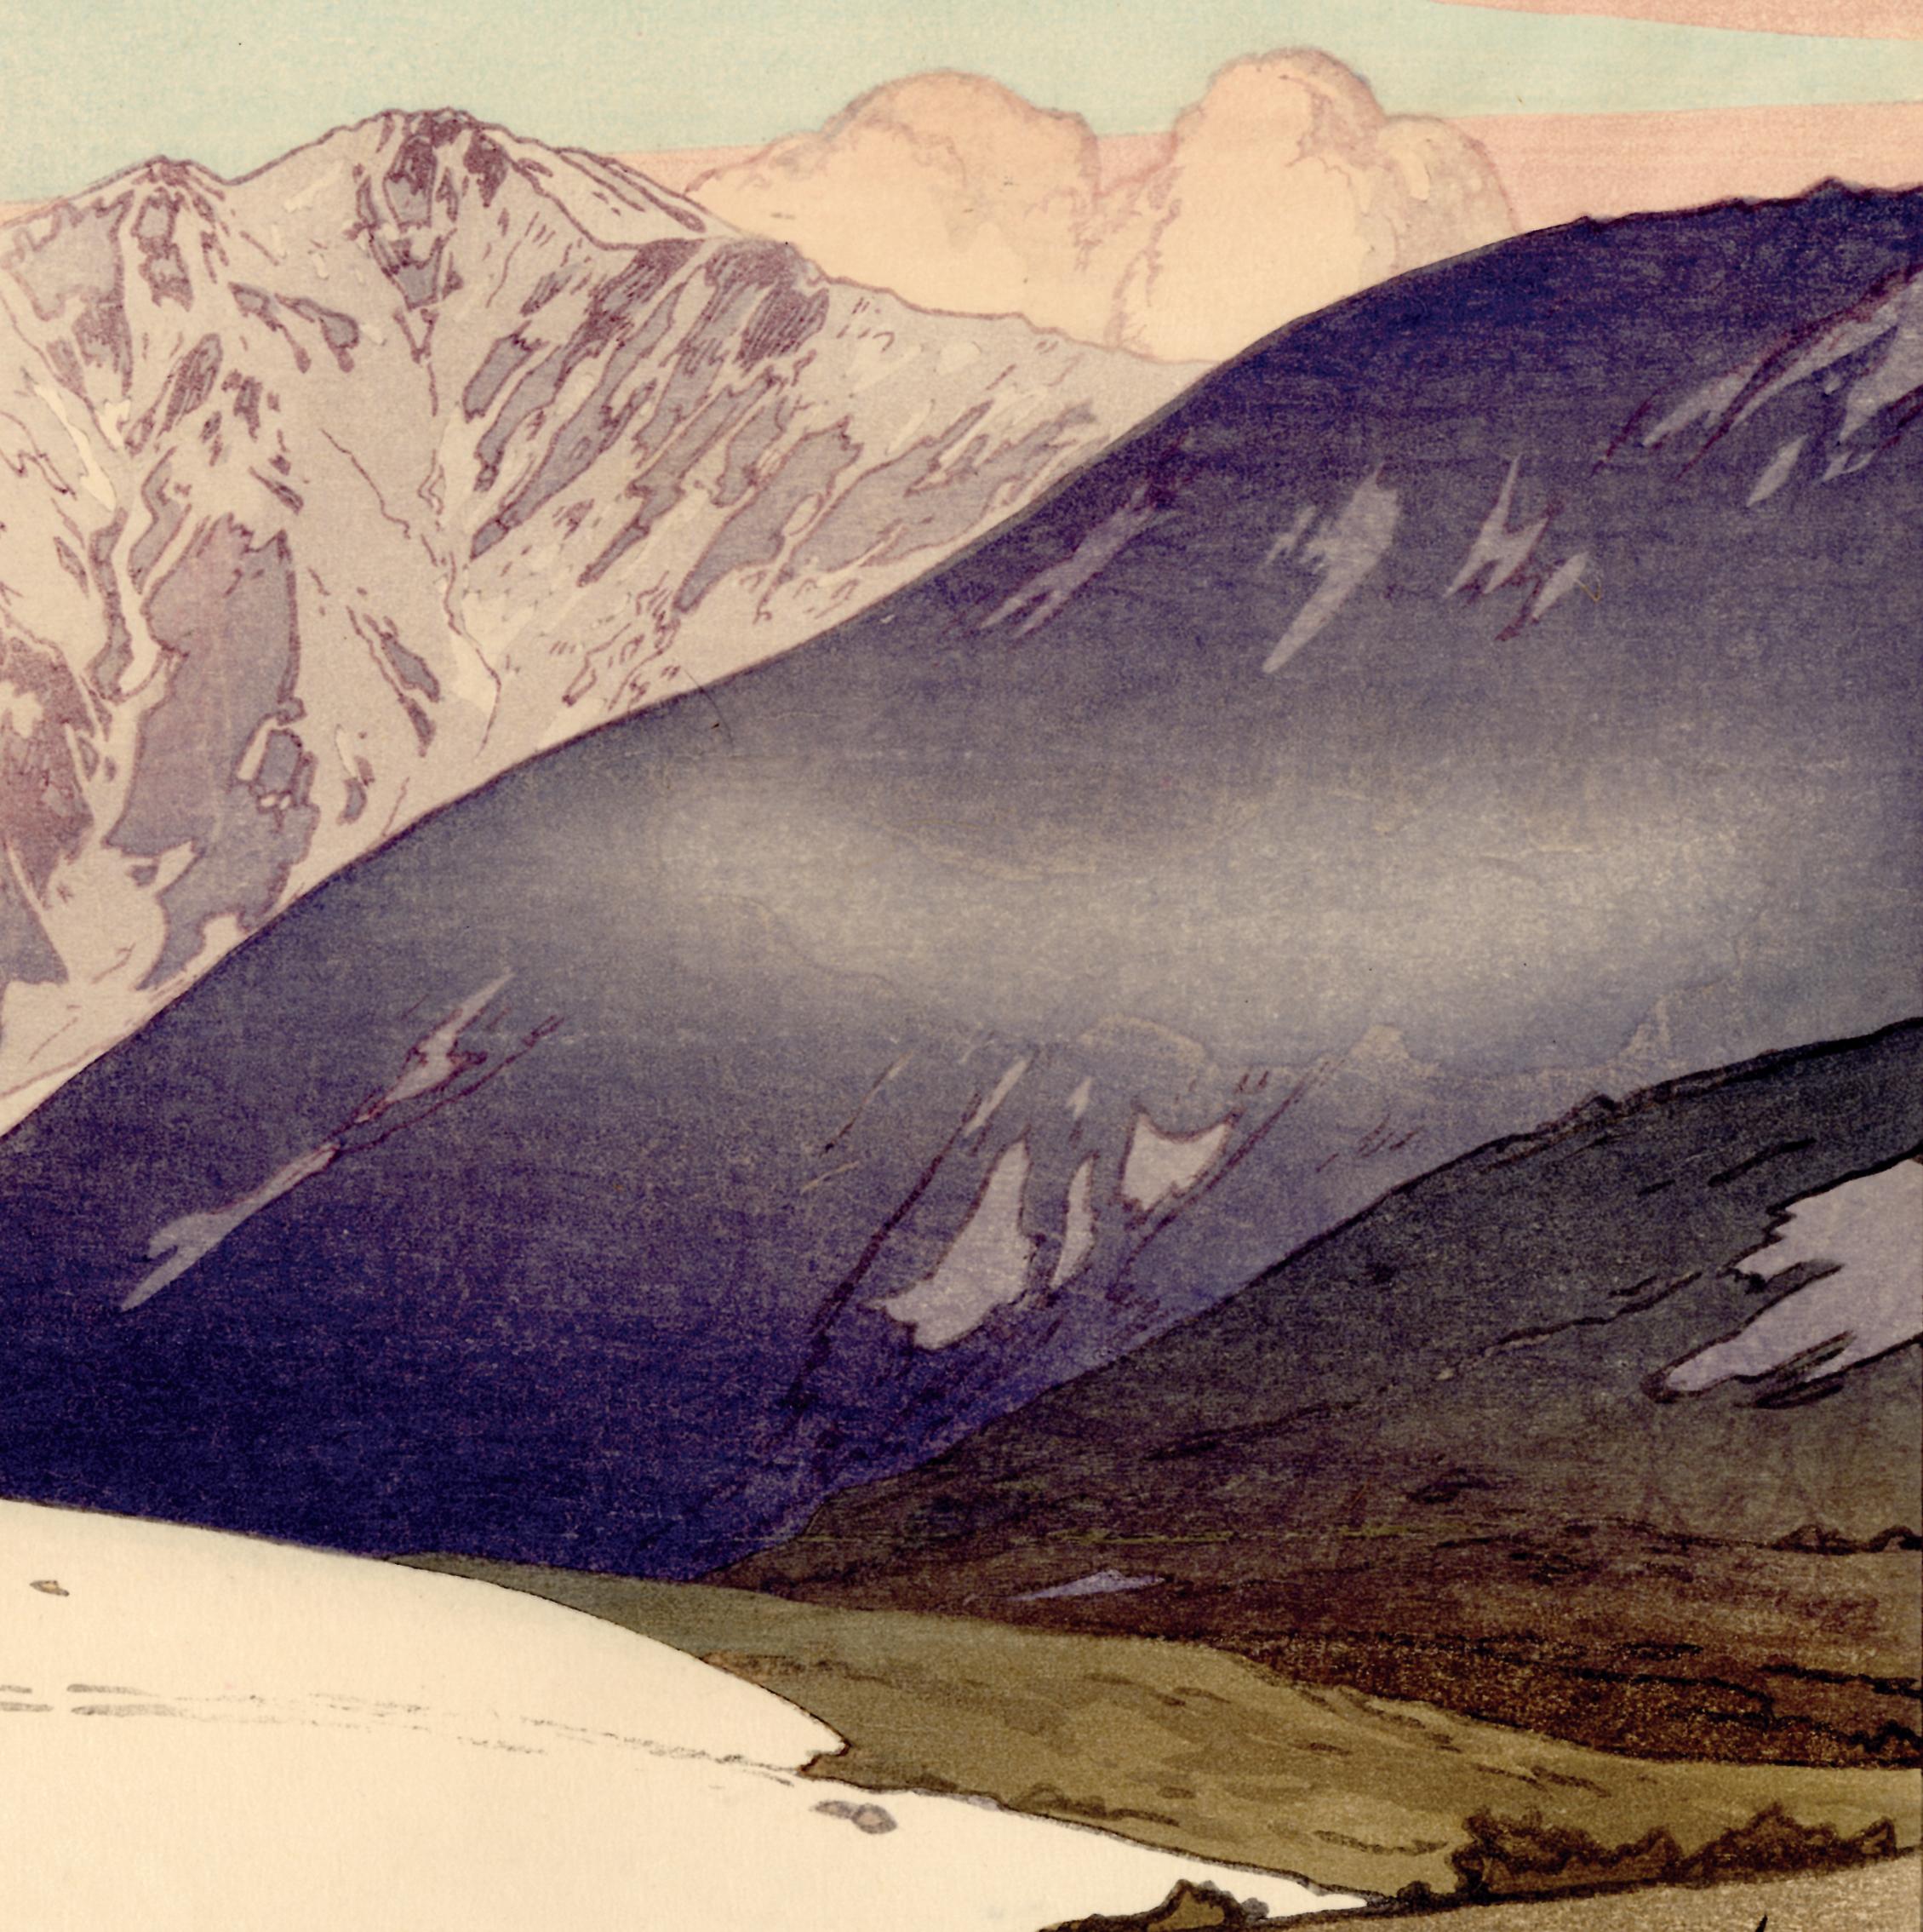 Original handmade Japanese woodblock print. Tateyama Betsuzan. We see smoke issuing from huts on a mountain expanse,  a region of snow nearby. A cloud hovers left and right, and every surrounding peak has different colors and textures. The printing